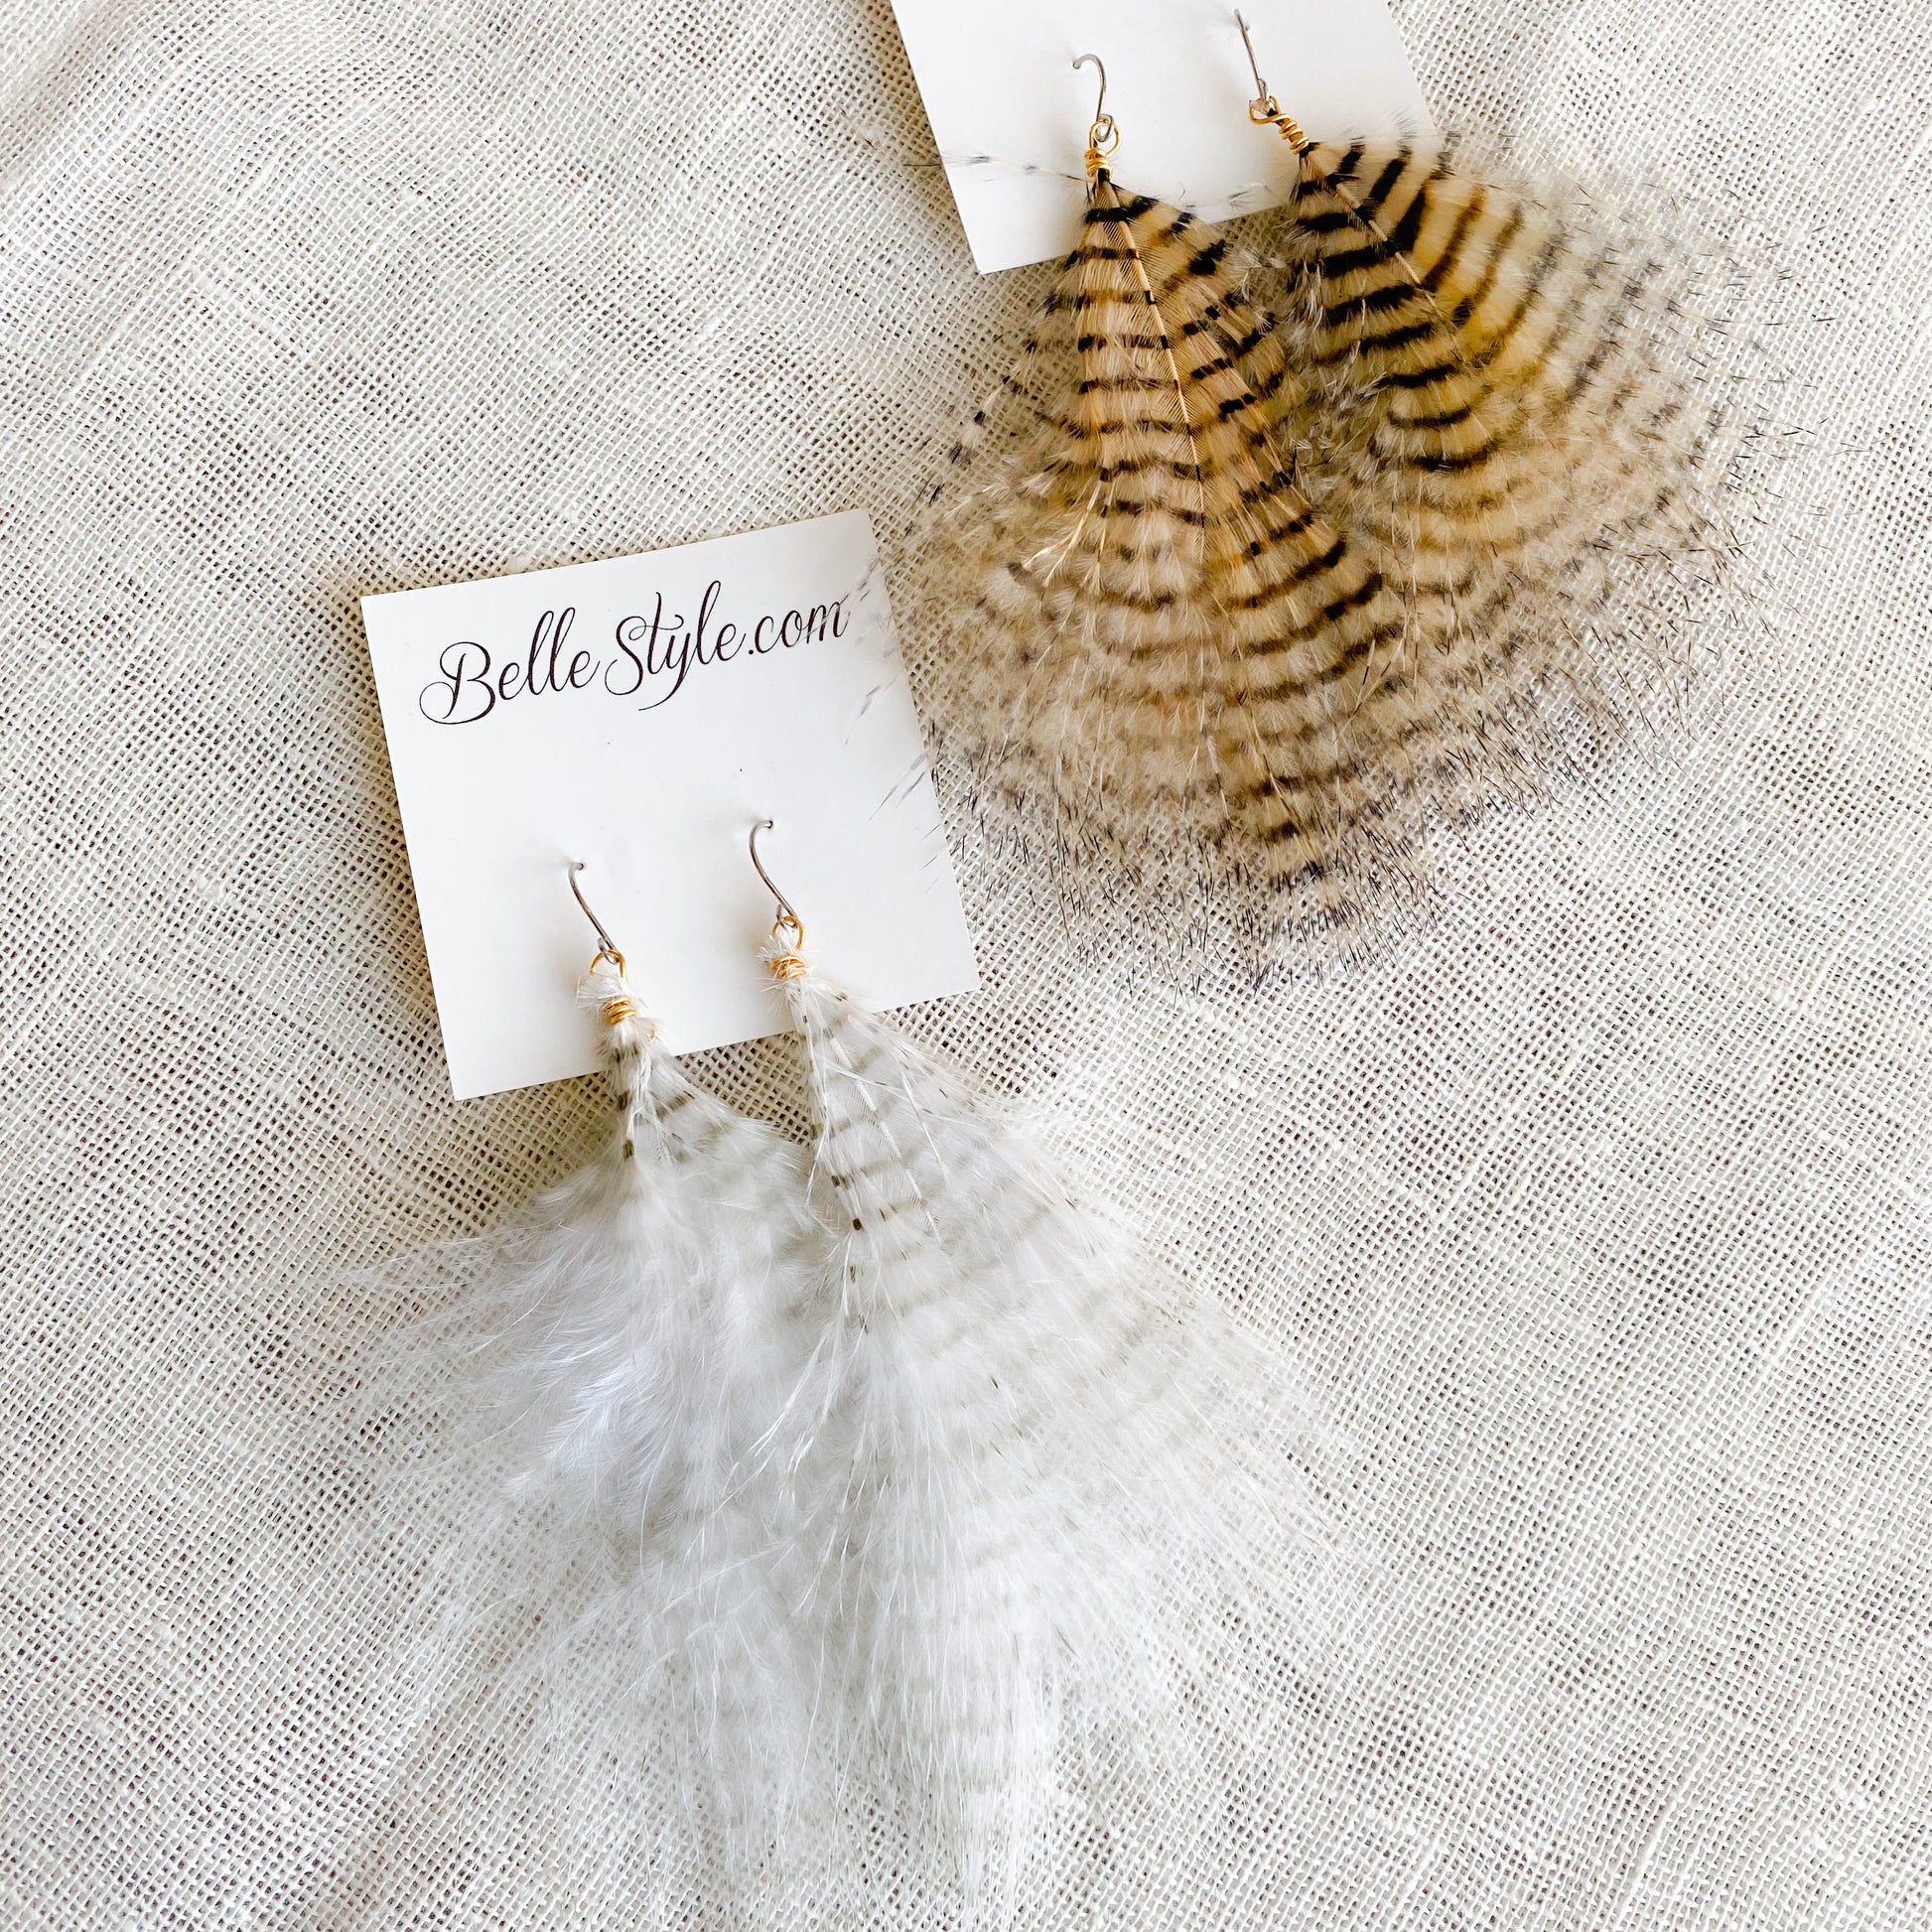 Tiger Feather Earrings - Bellestyle white  natural maribu